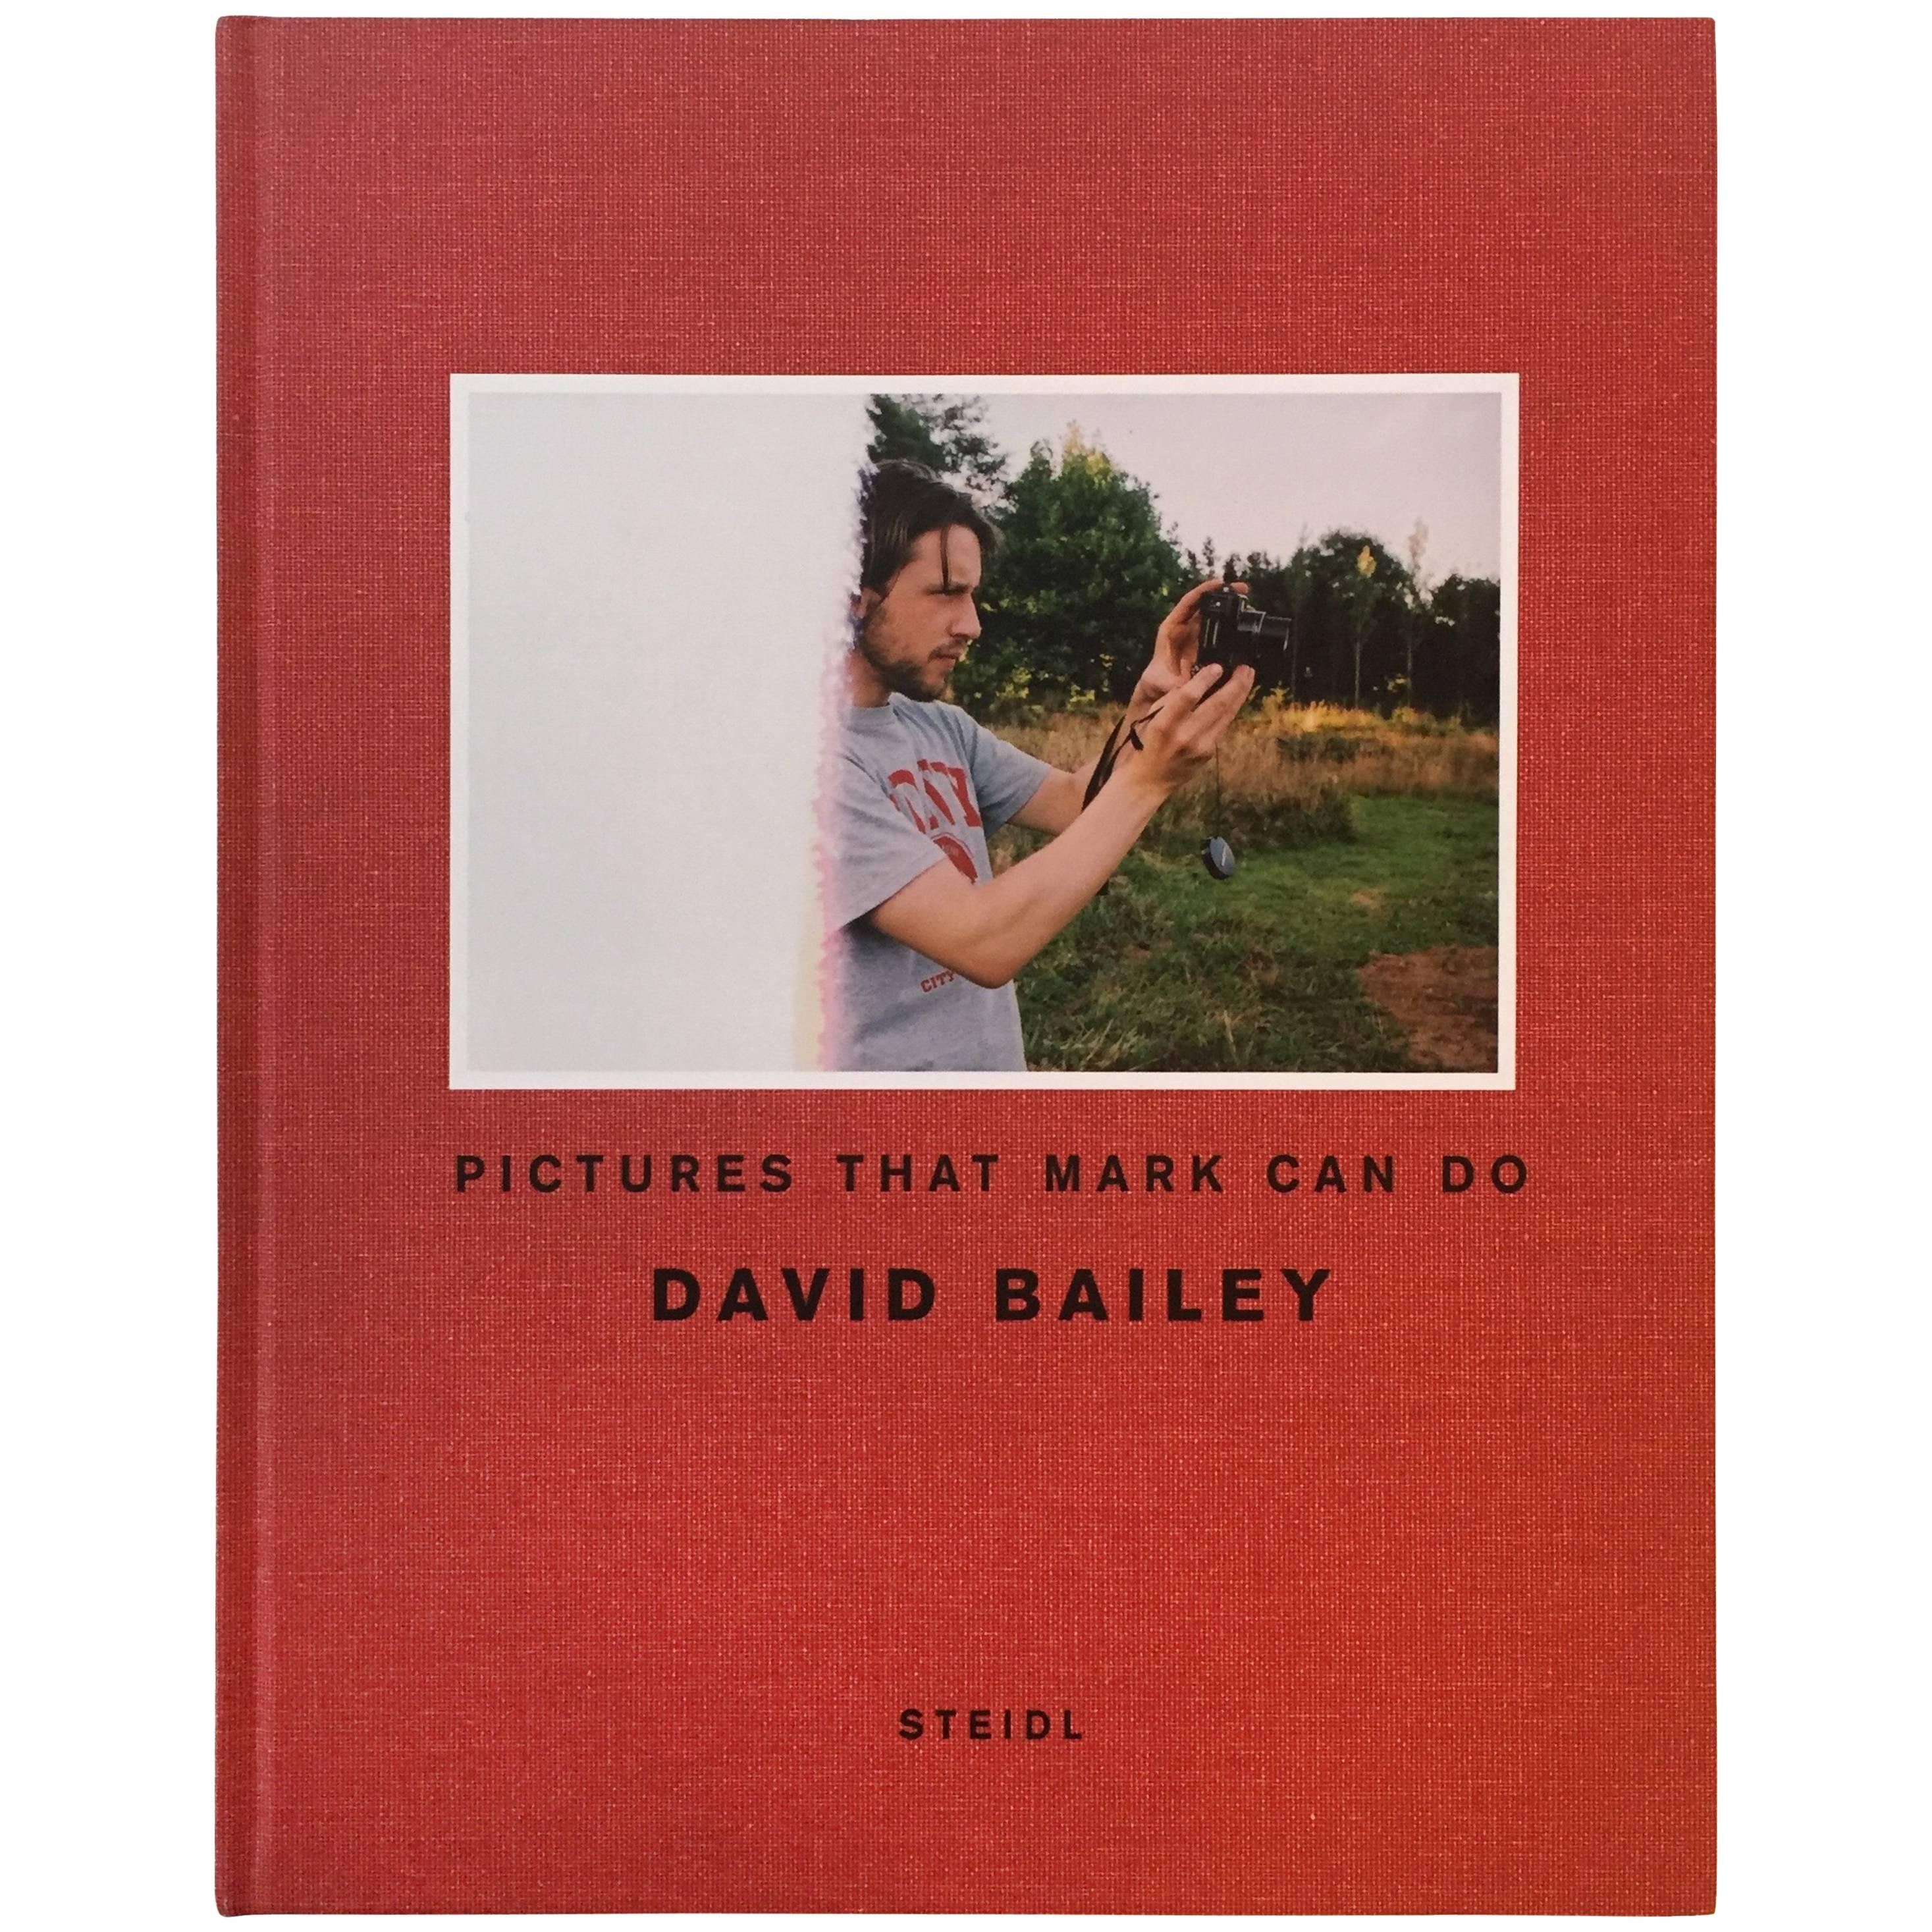 Pictures That Mark Can Do - David Bailey - Signed 1st Edition, Steidl, 2007